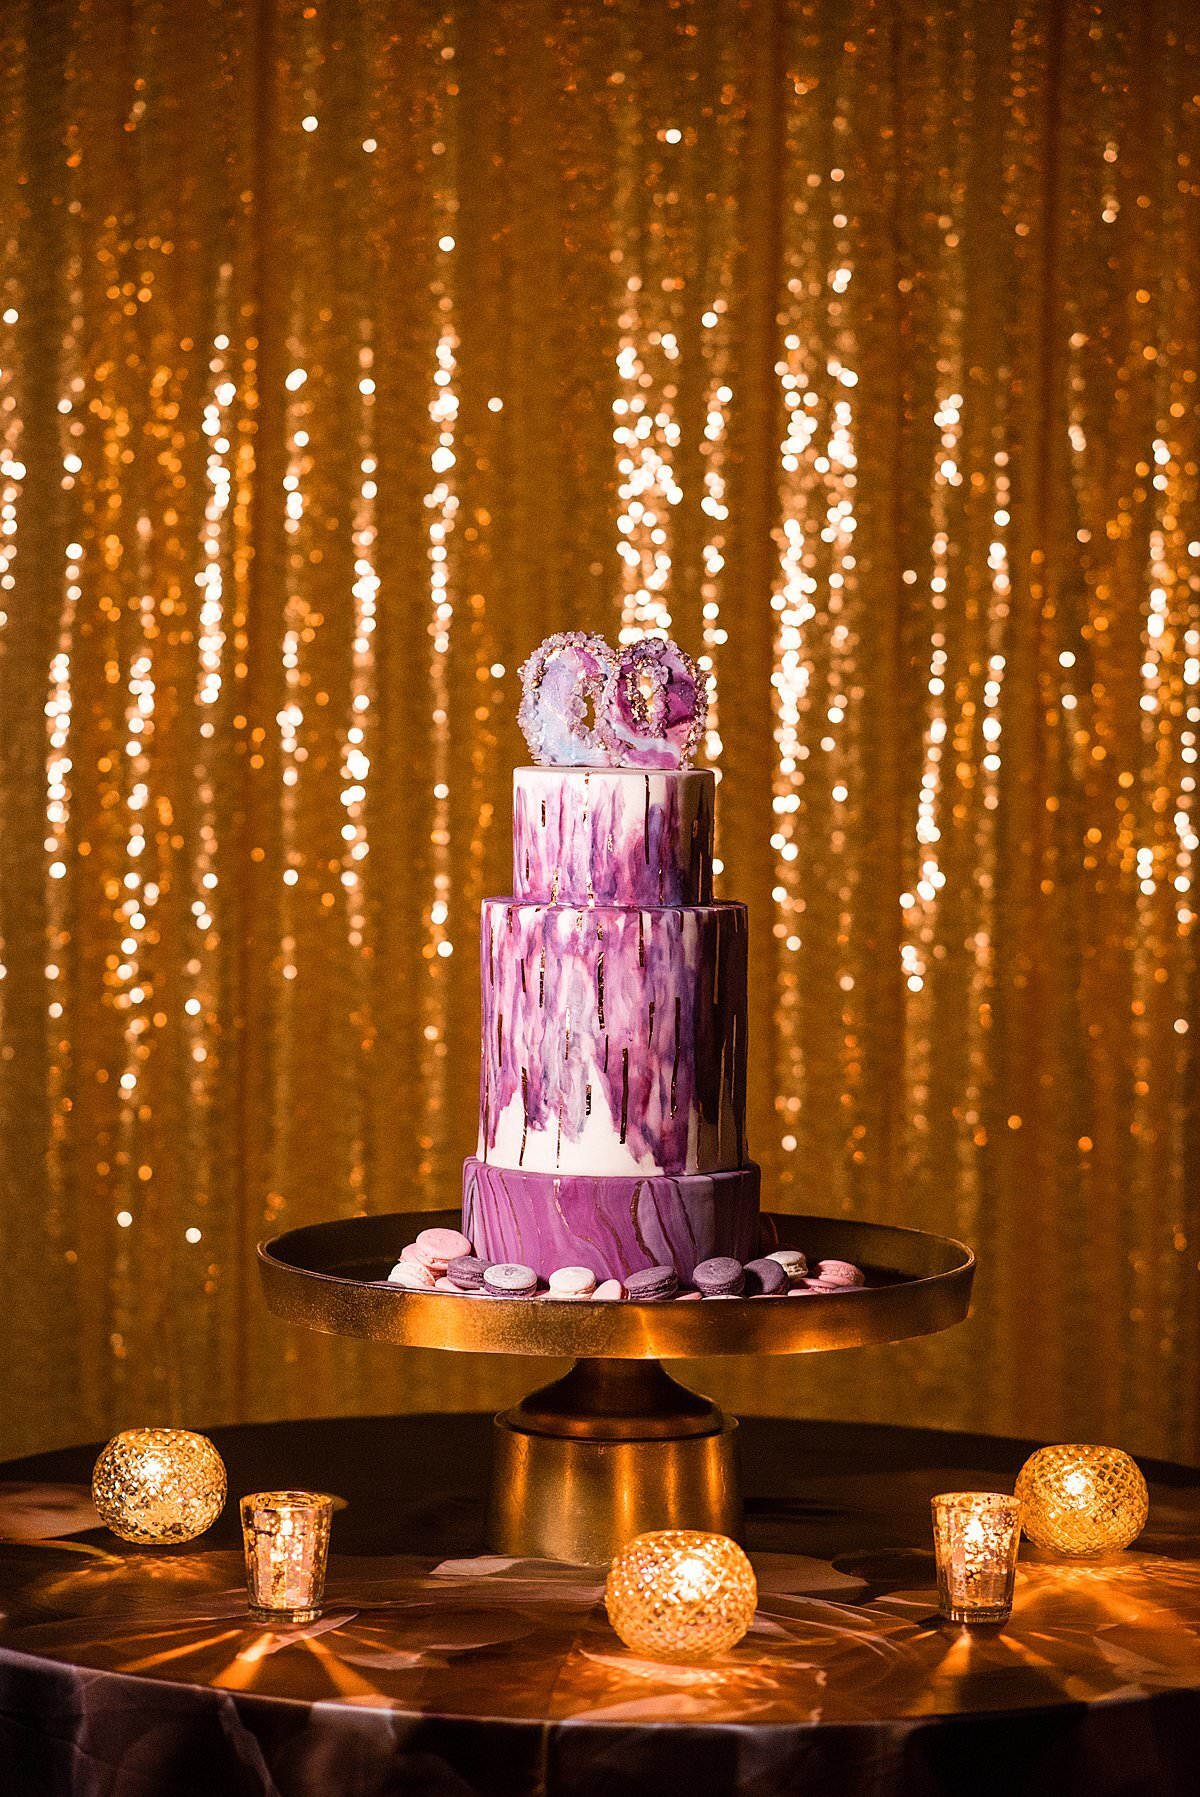 3 tier wedding cake of different tier sizes with artistic marbling pink, purple and white styles and gold accents